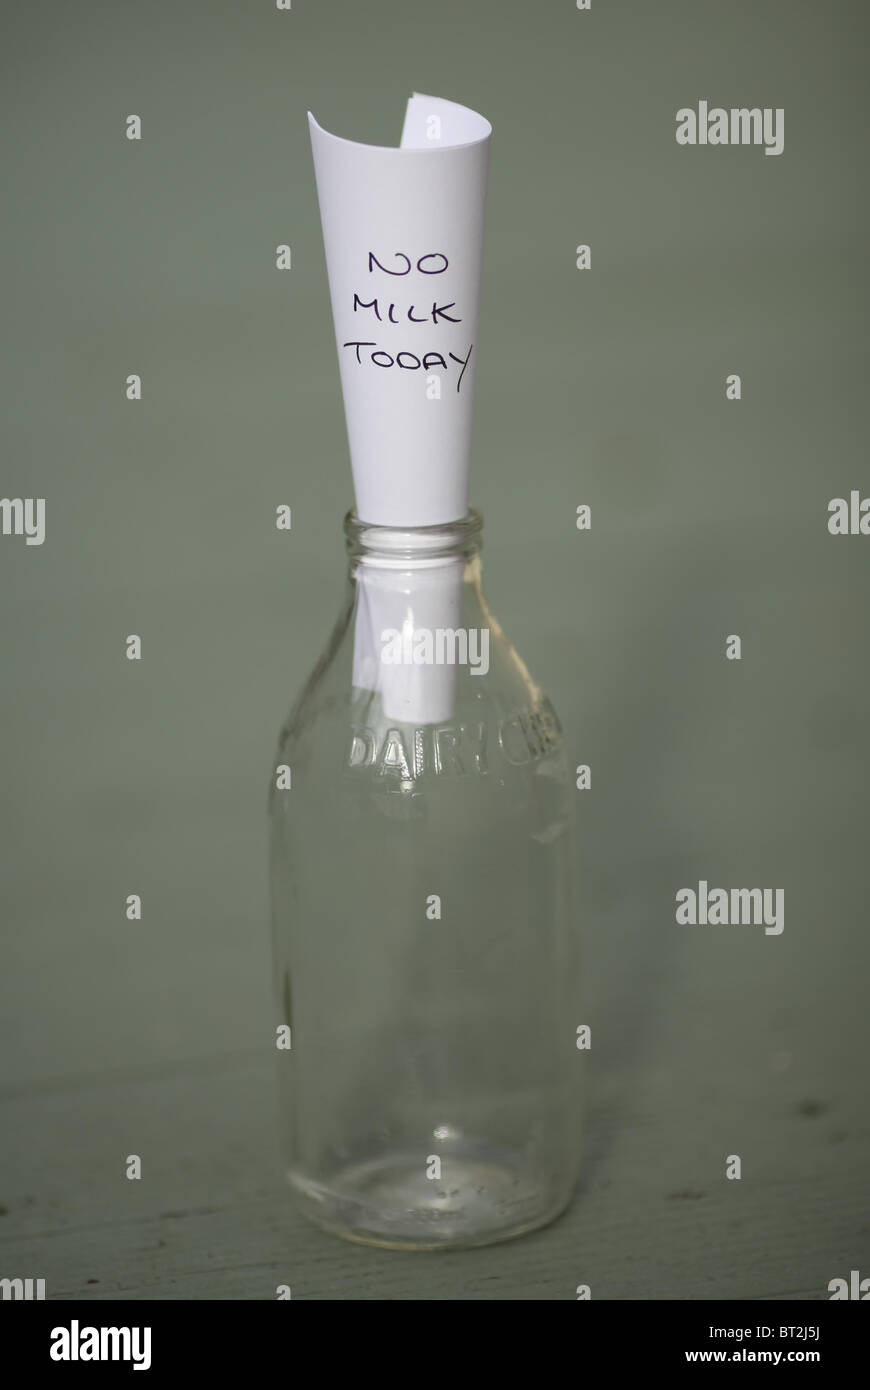 A milk bottle with a note in it reading 'No milk today'. Stock Photo